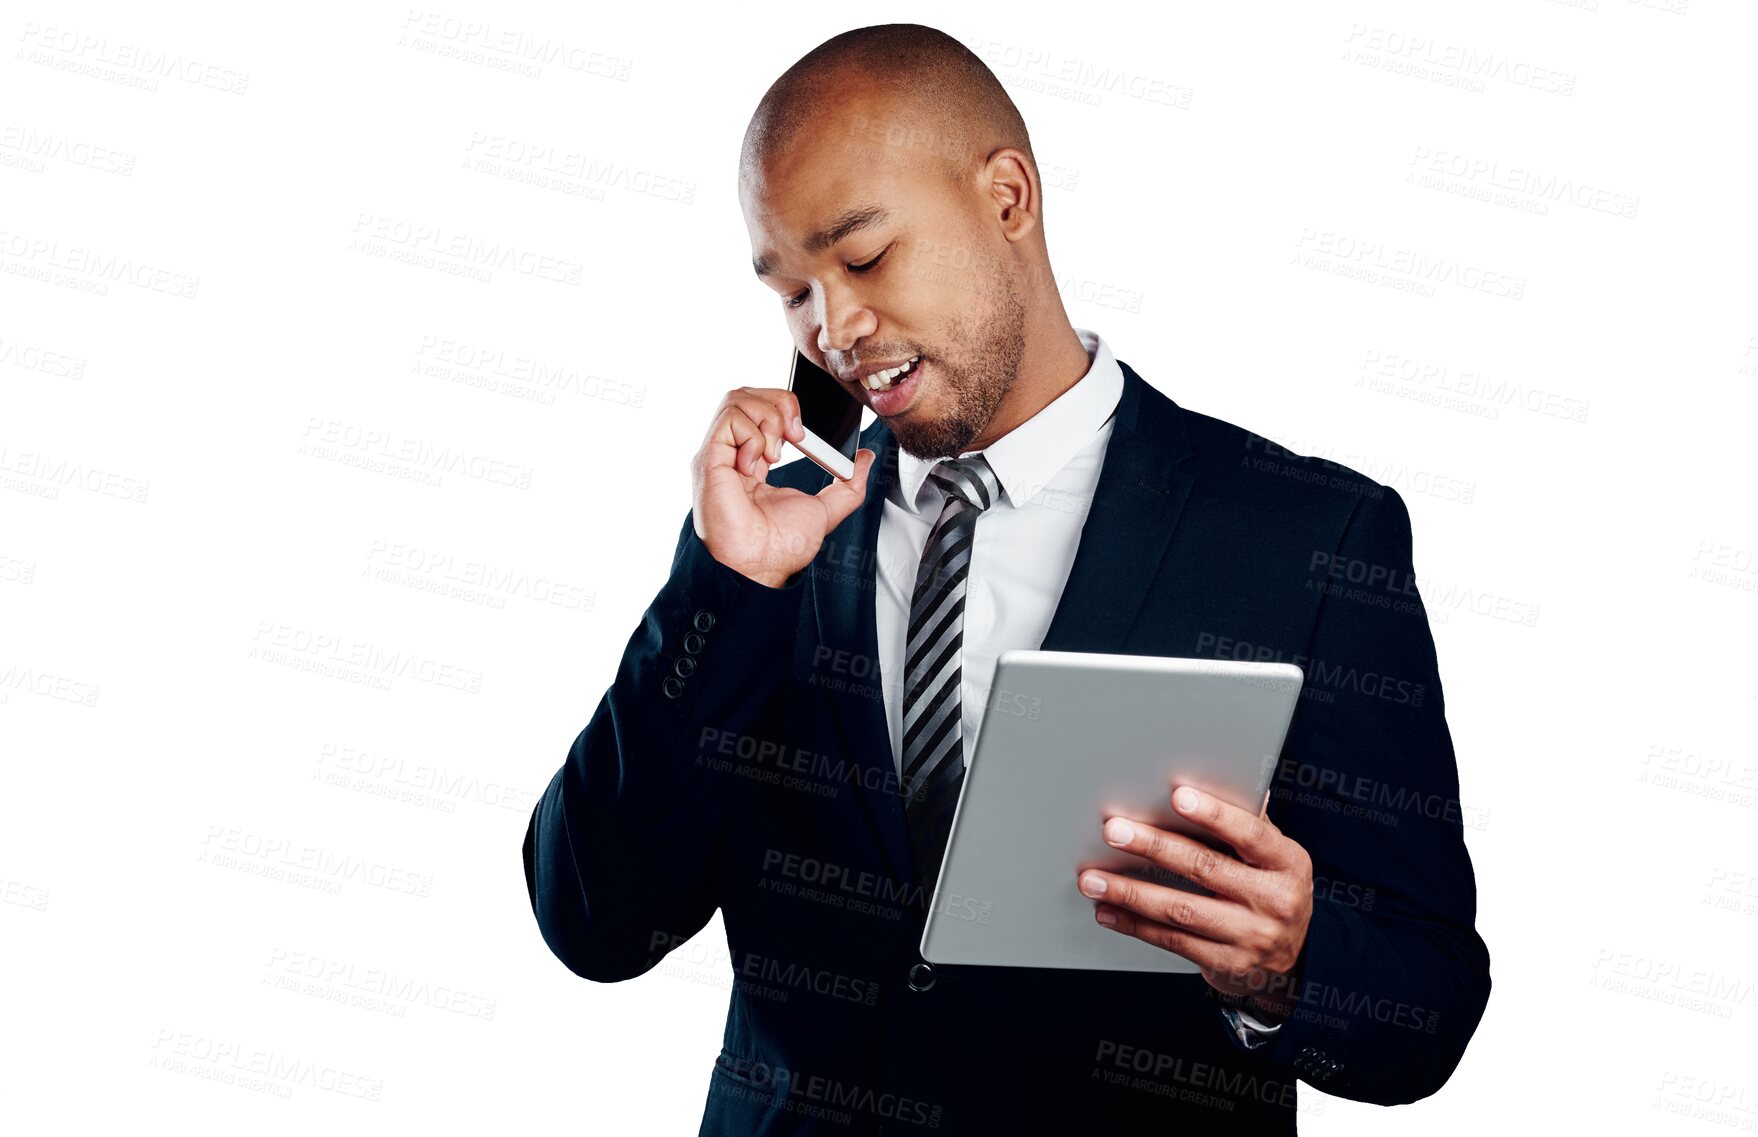 Buy stock photo Businessman with phone call, tablet and discussion isolated on transparent png background with legal advice. Networking, digital app and black man lawyer with online business, smartphone and chat.